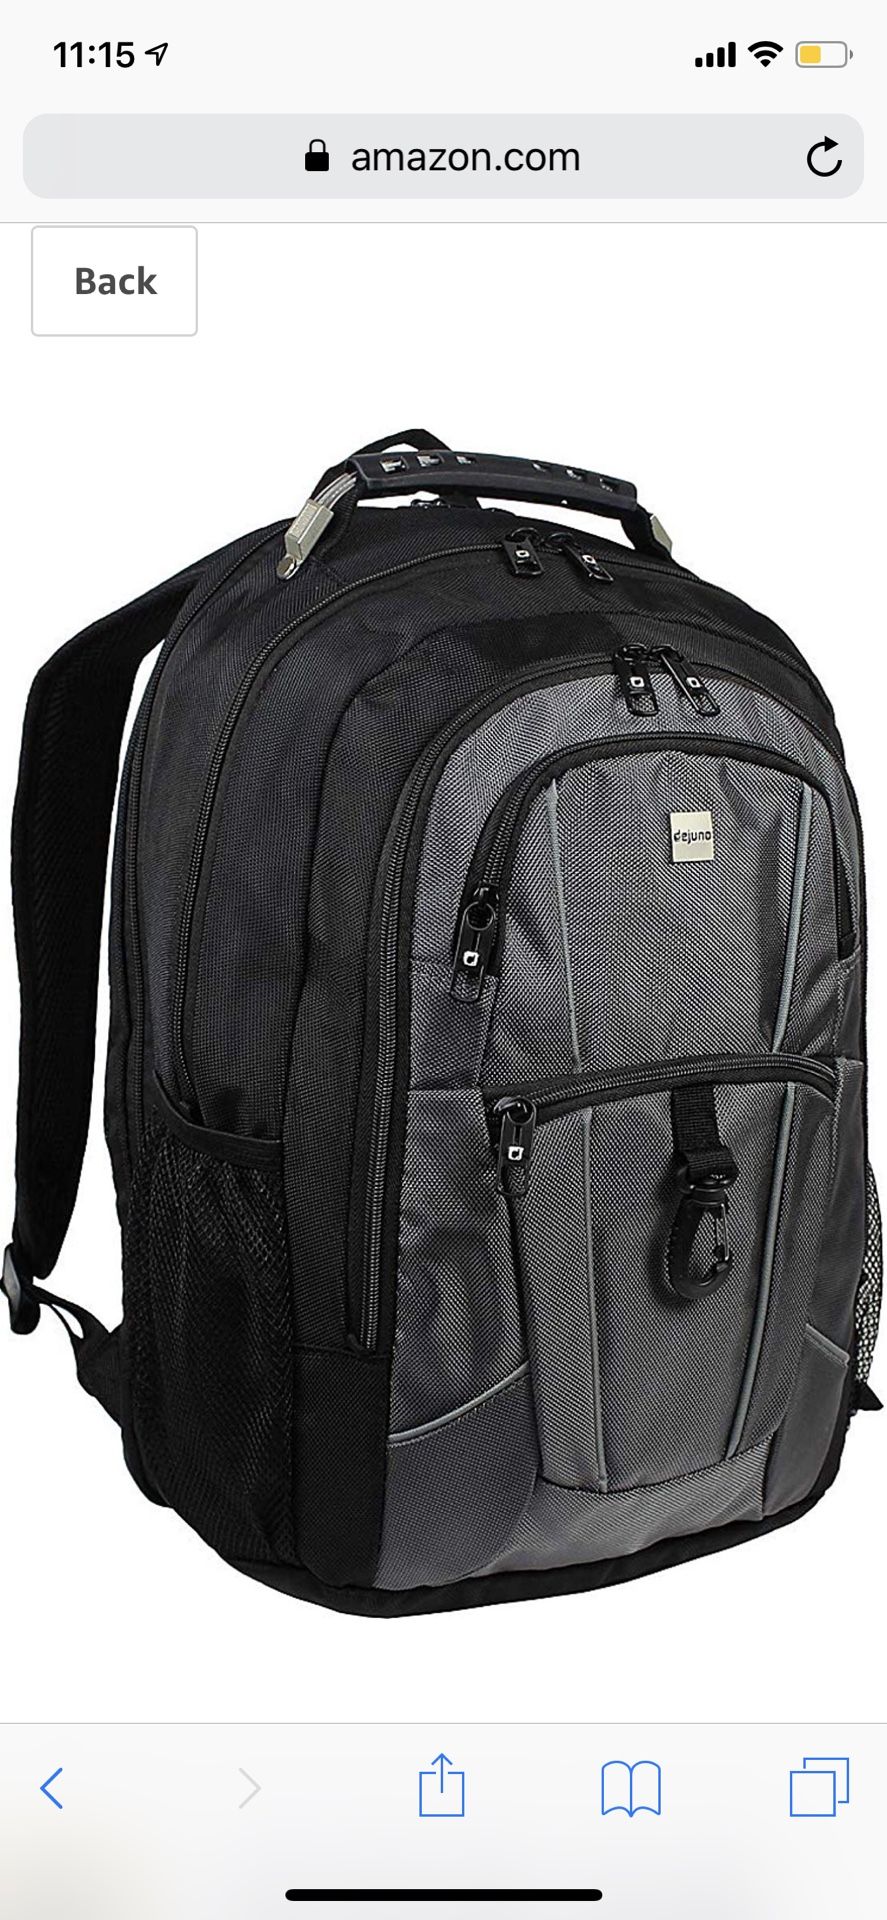 Dejuno Commuter BackPack (Black and Grey) with 15.6” laptop pocket